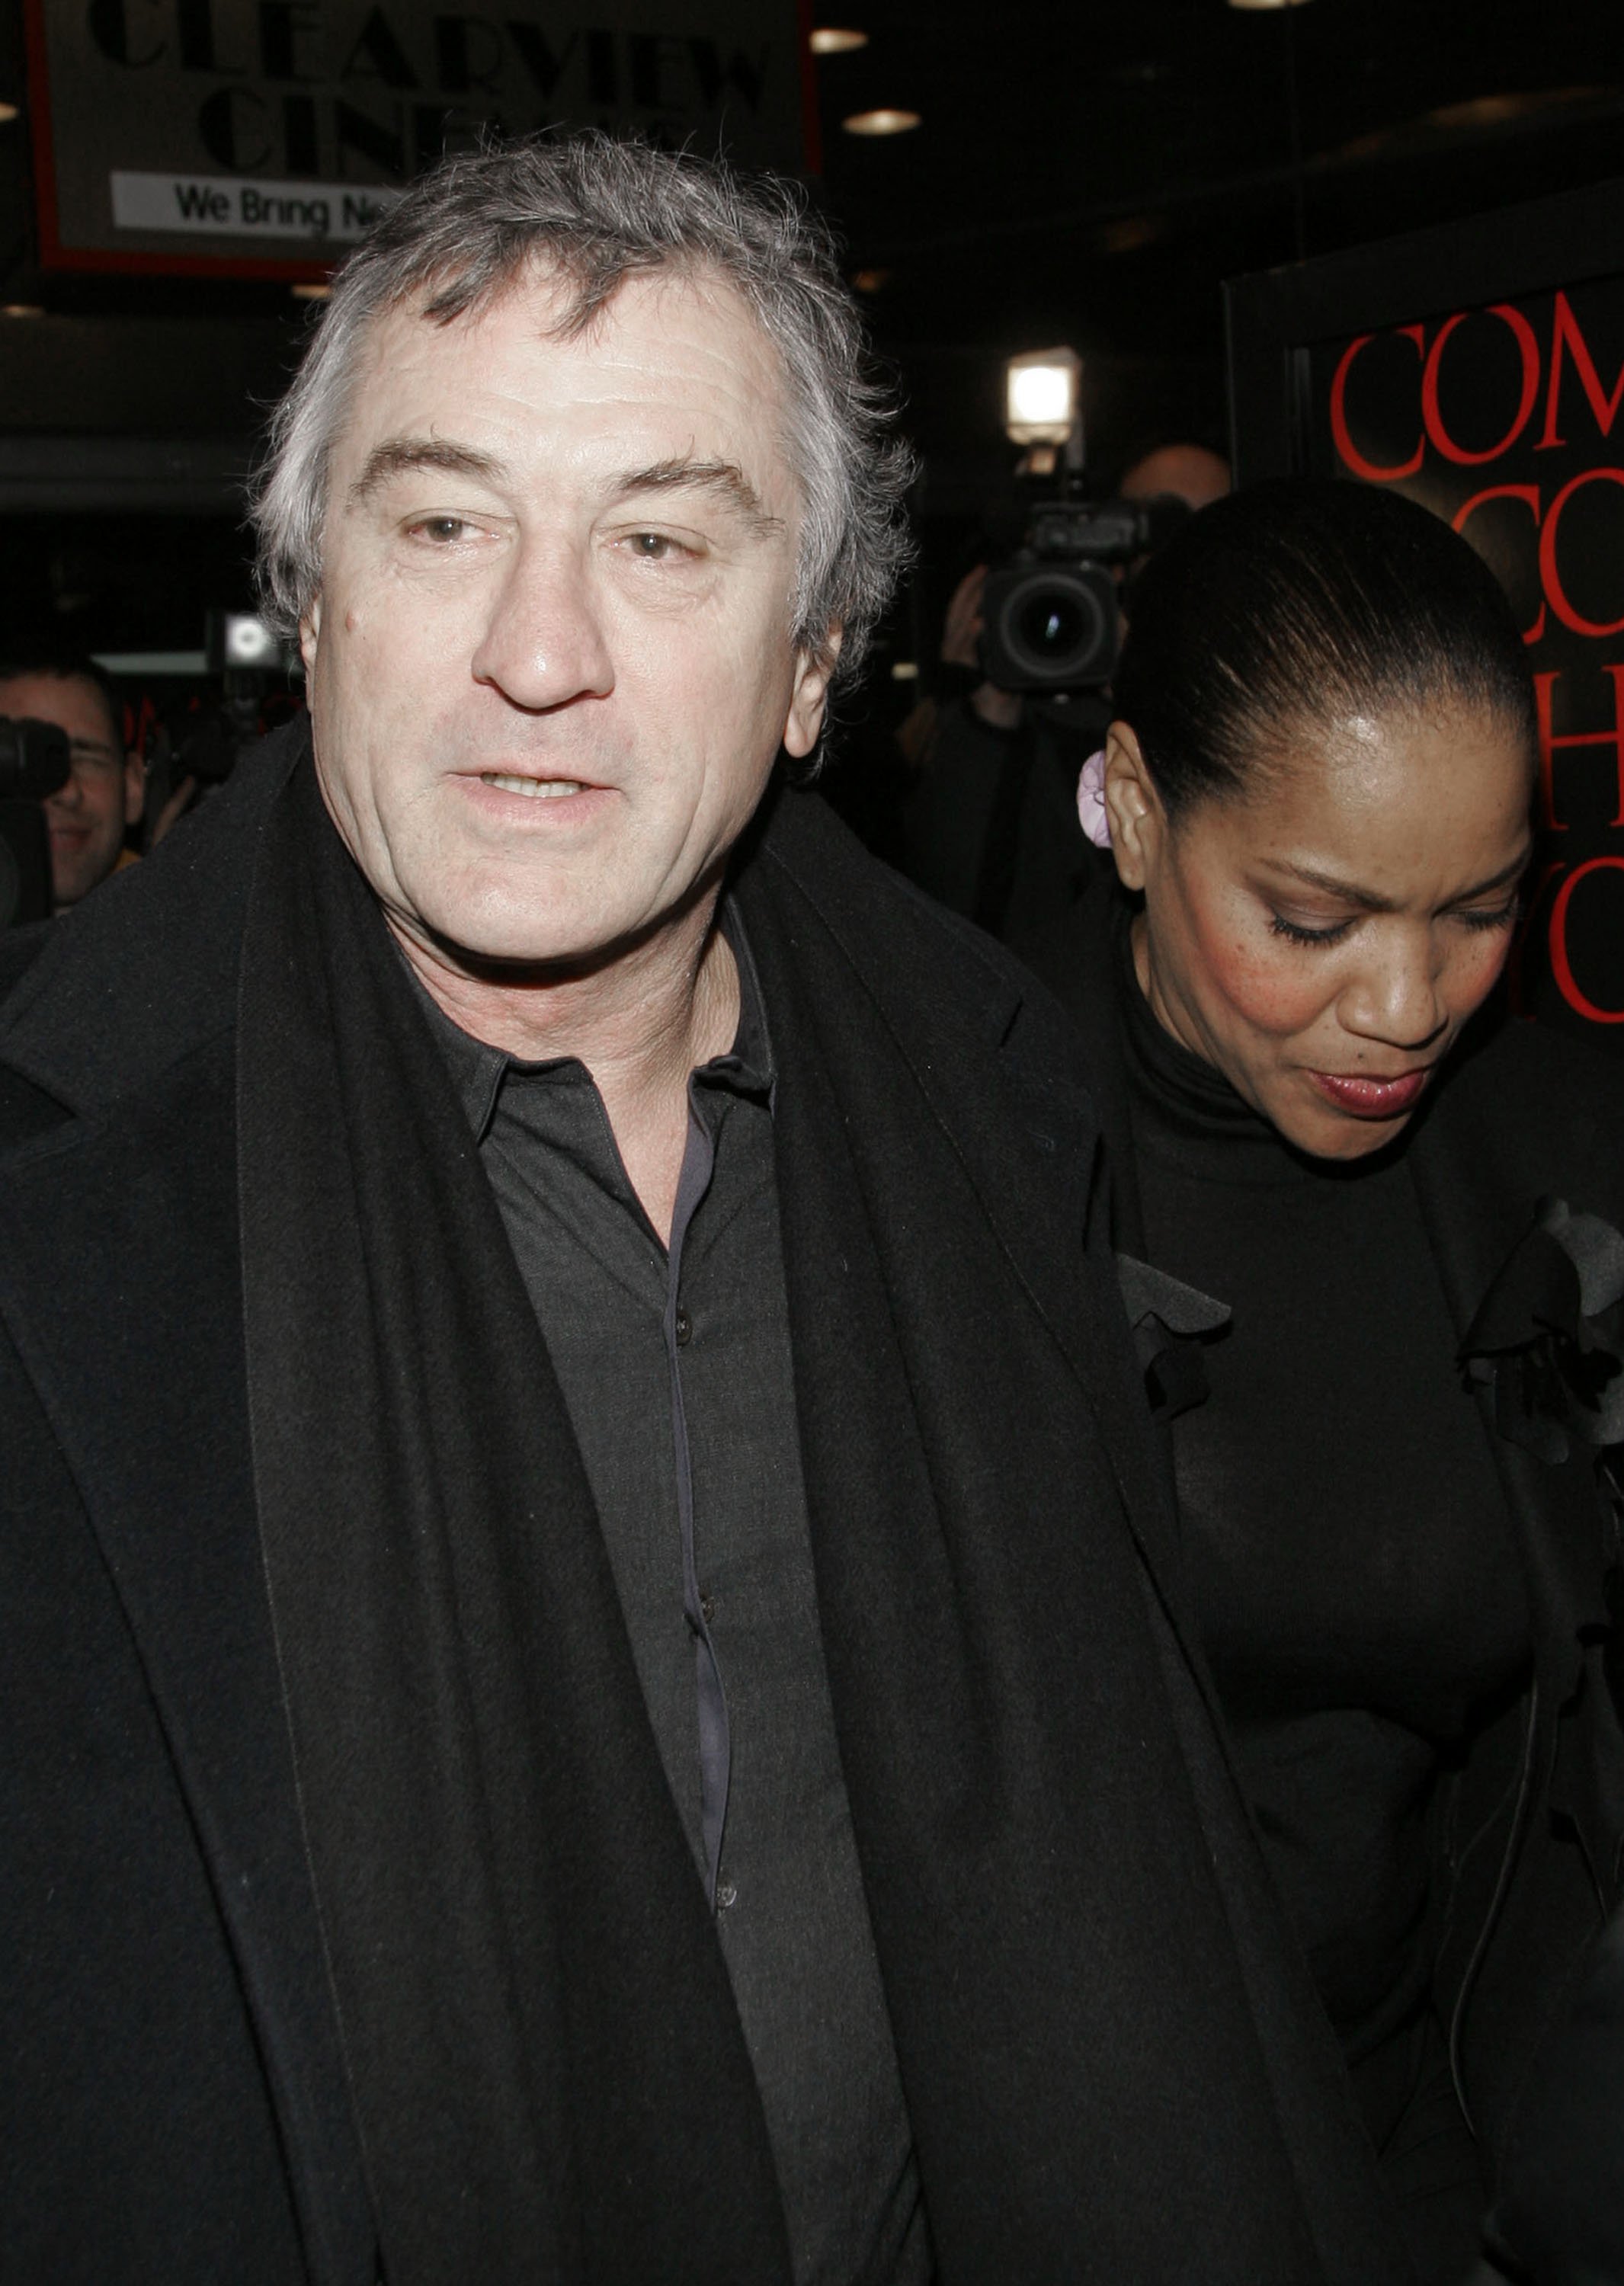 Robert De Niro and Grace Hightower arriving to the premiere of "Hide And Seek" at the Beekman theater on January 26, 2005 in New York City | Source: Getty Images